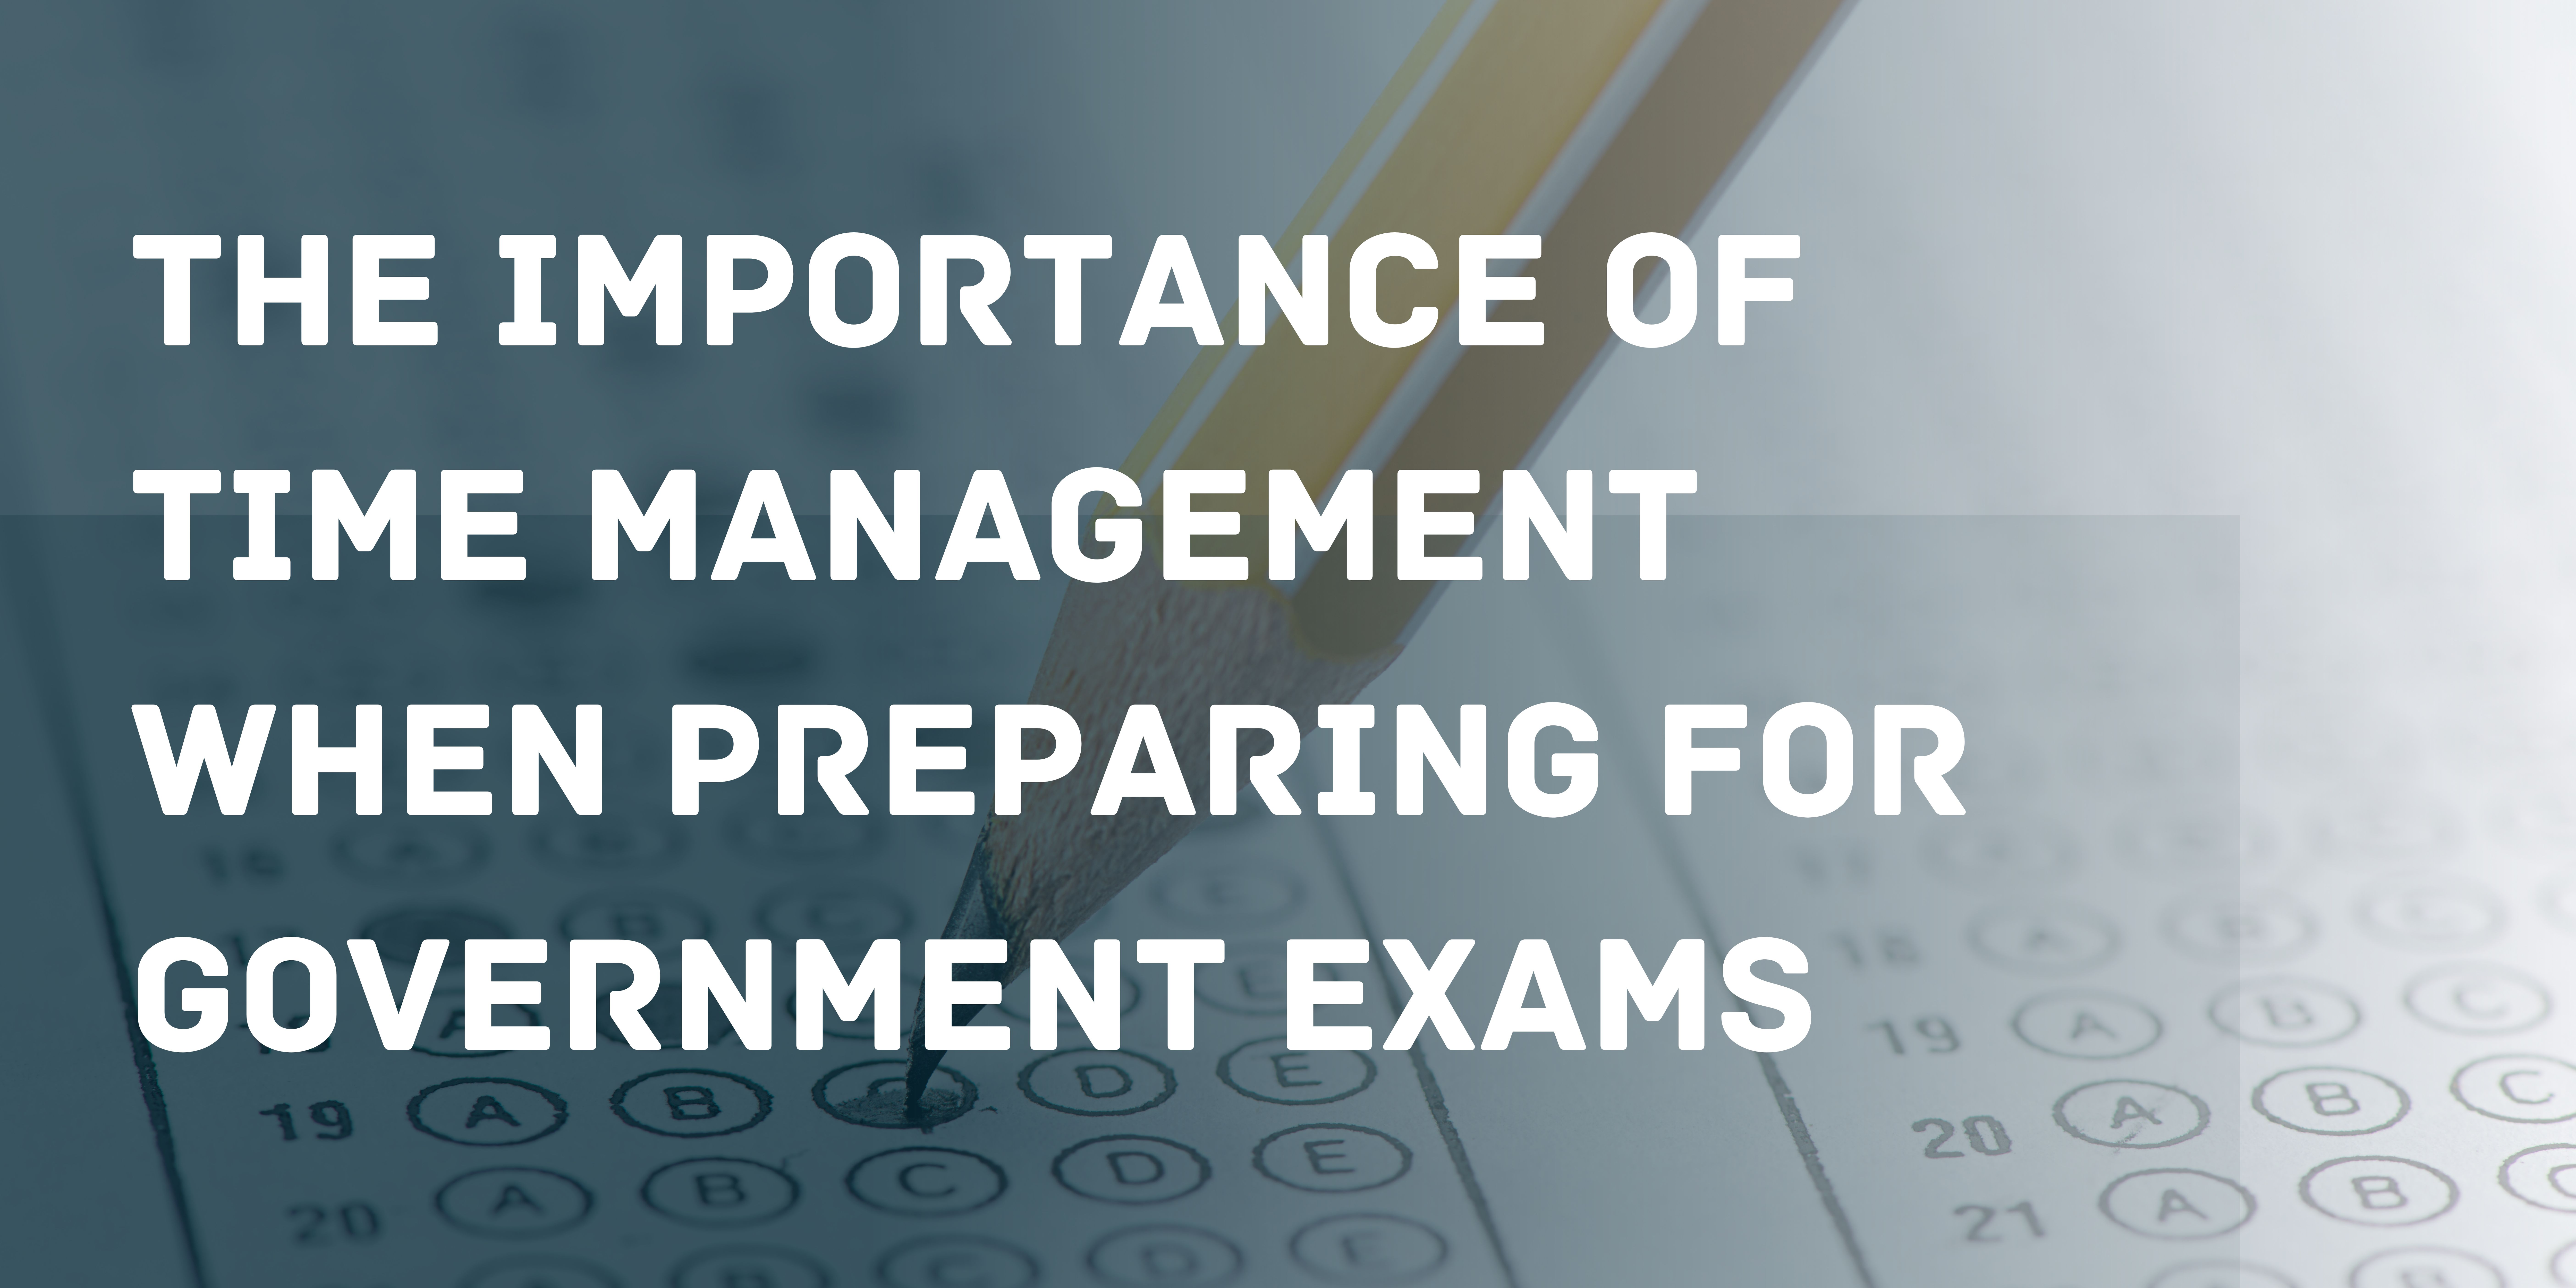 The importance of time management when preparing for government exams